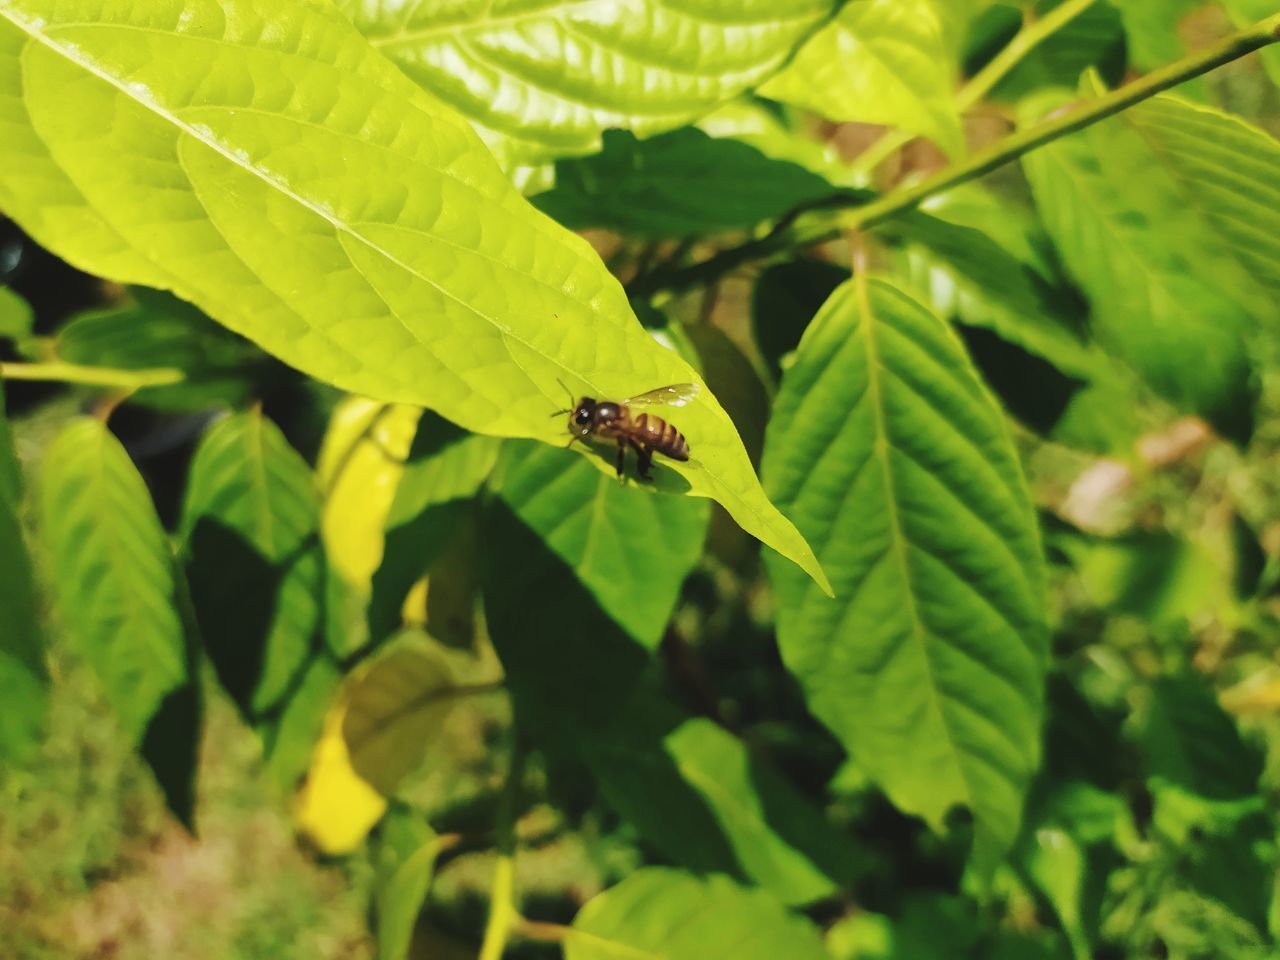 CLOSE-UP OF HONEY BEE ON LEAF